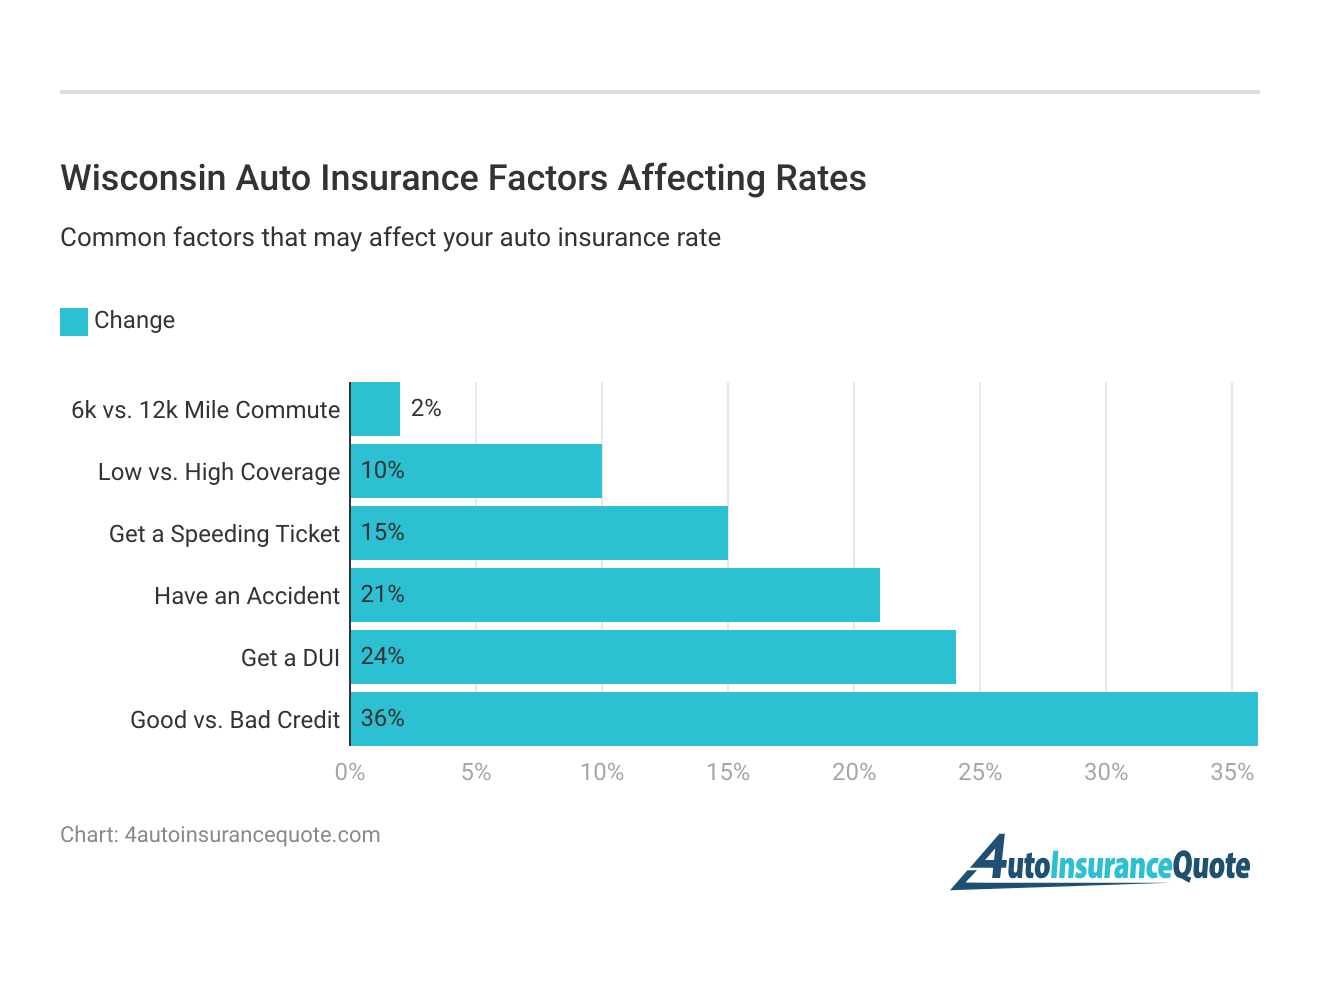 <h3>Wisconsin Auto Insurance Factors Affecting Rates</h3>